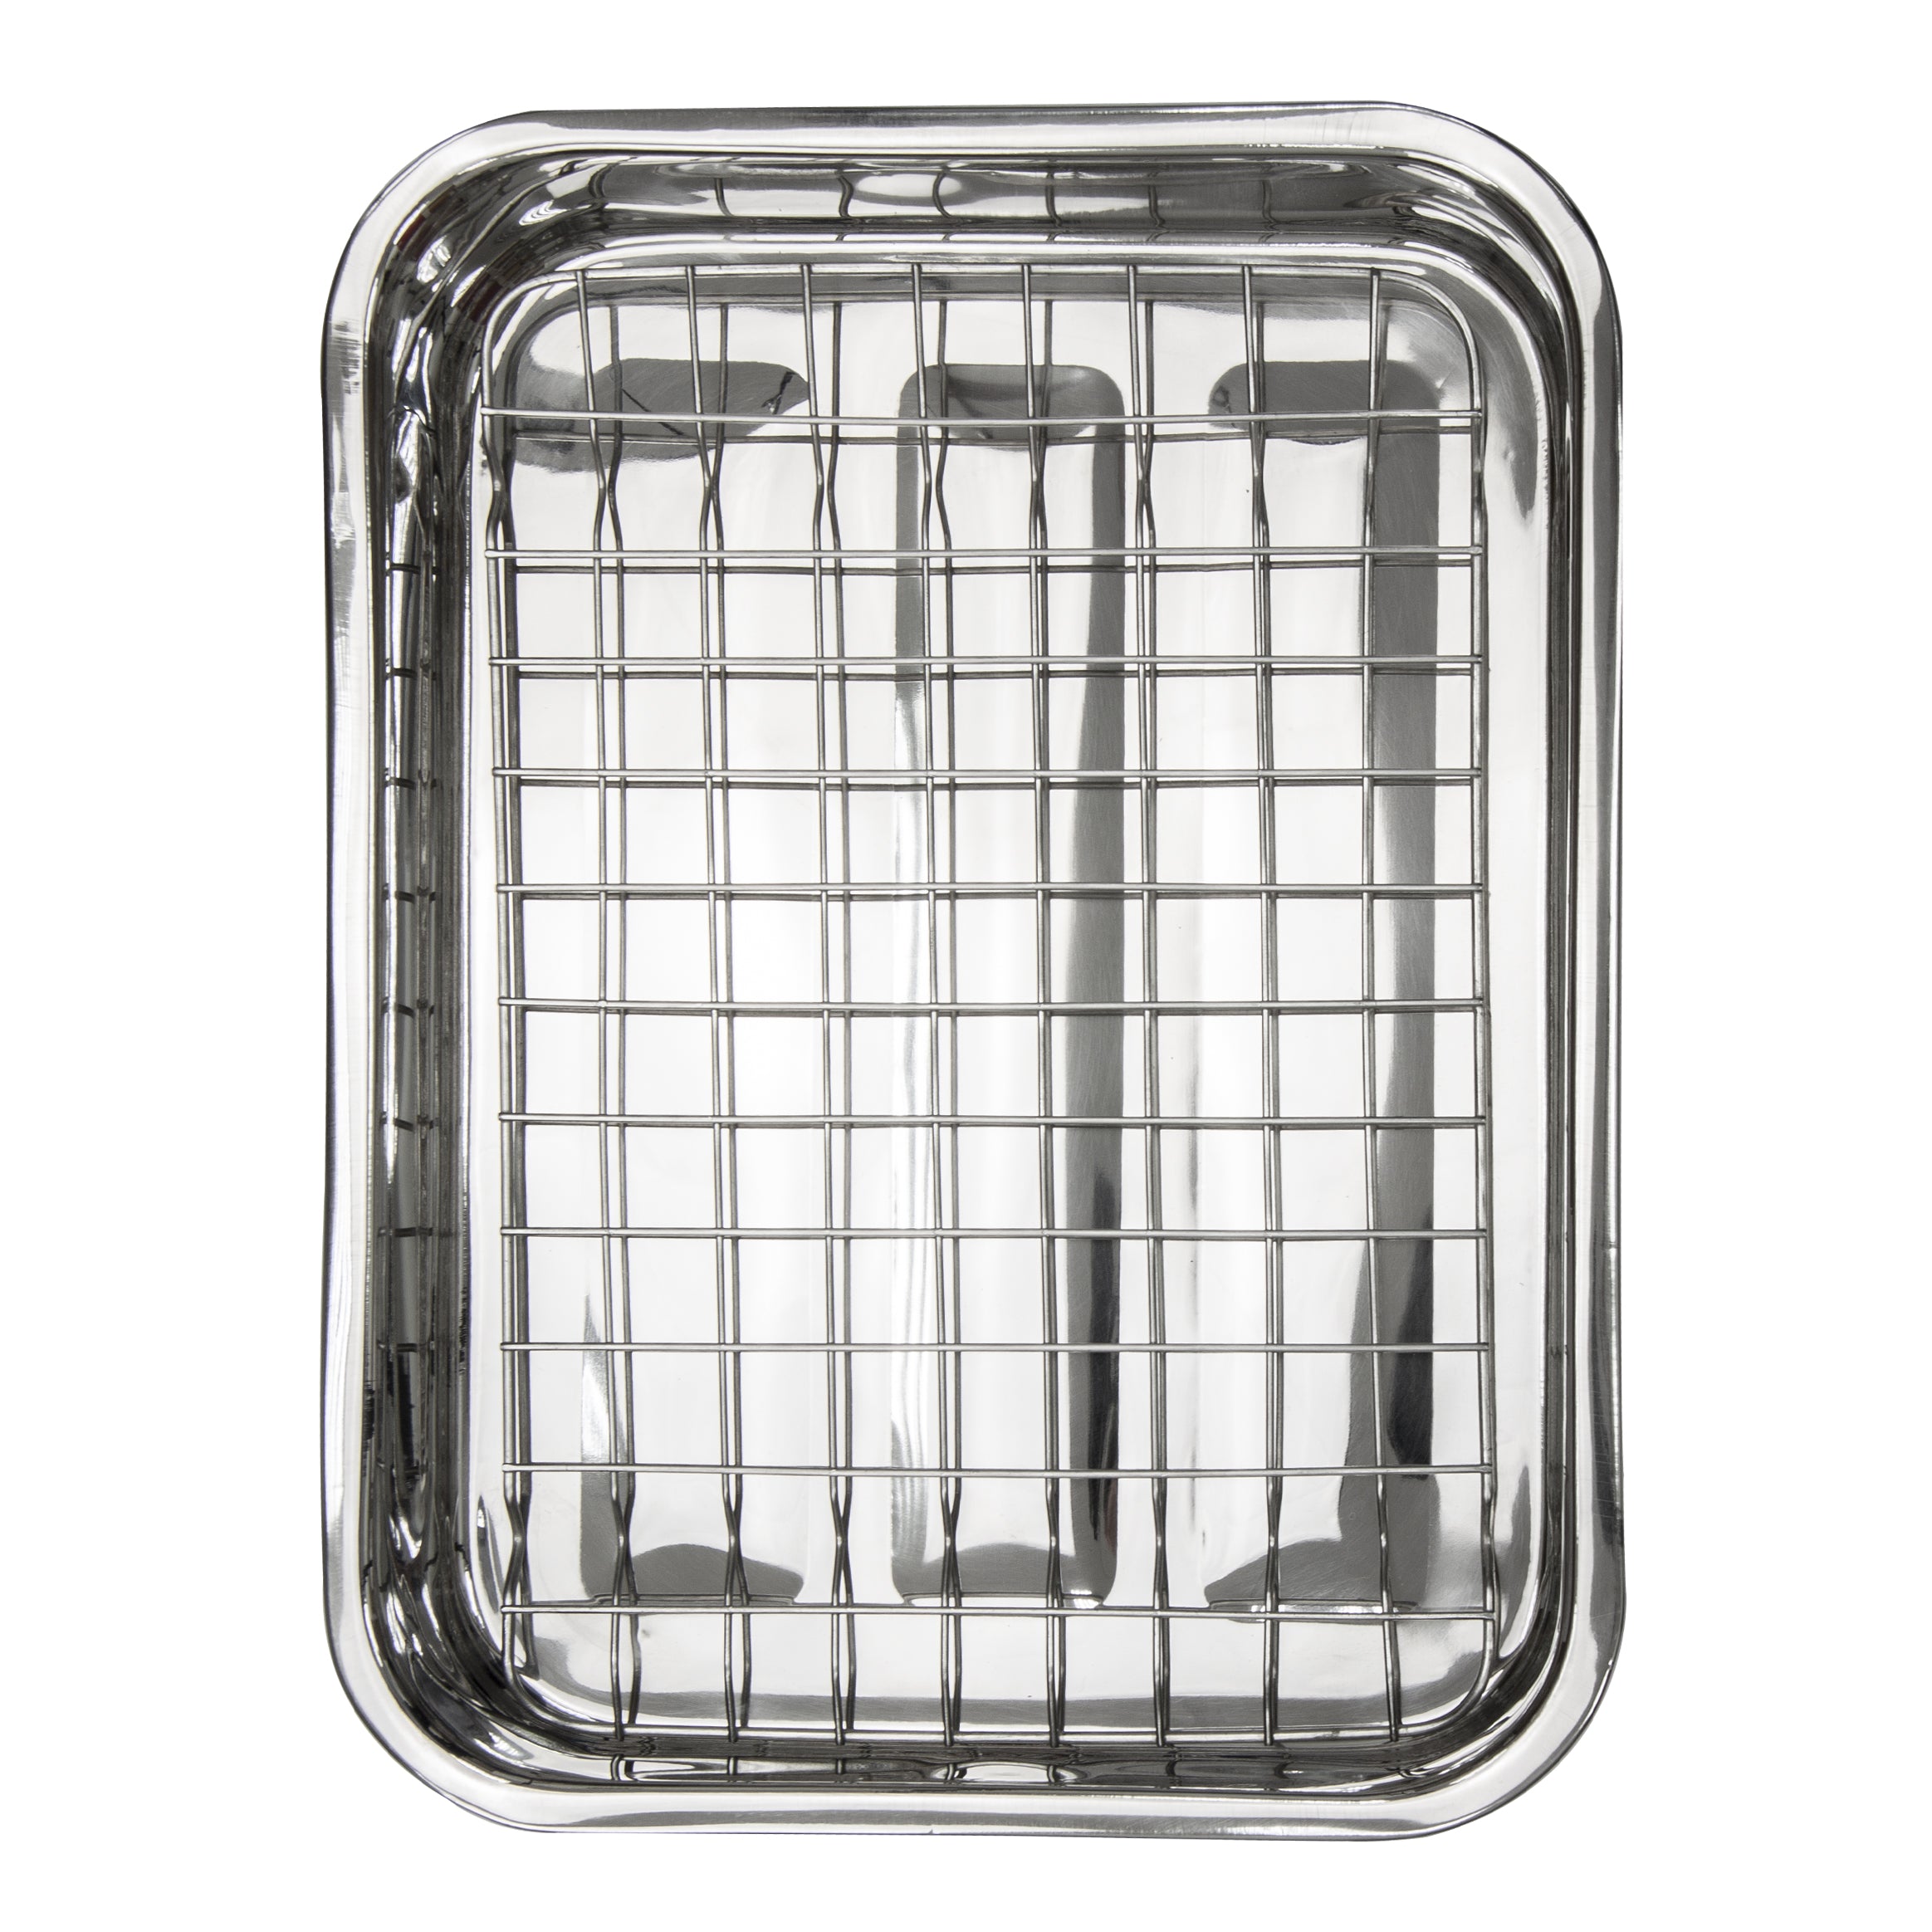 Stainless Steel Roasting Tray - With Rack/Grill - Small